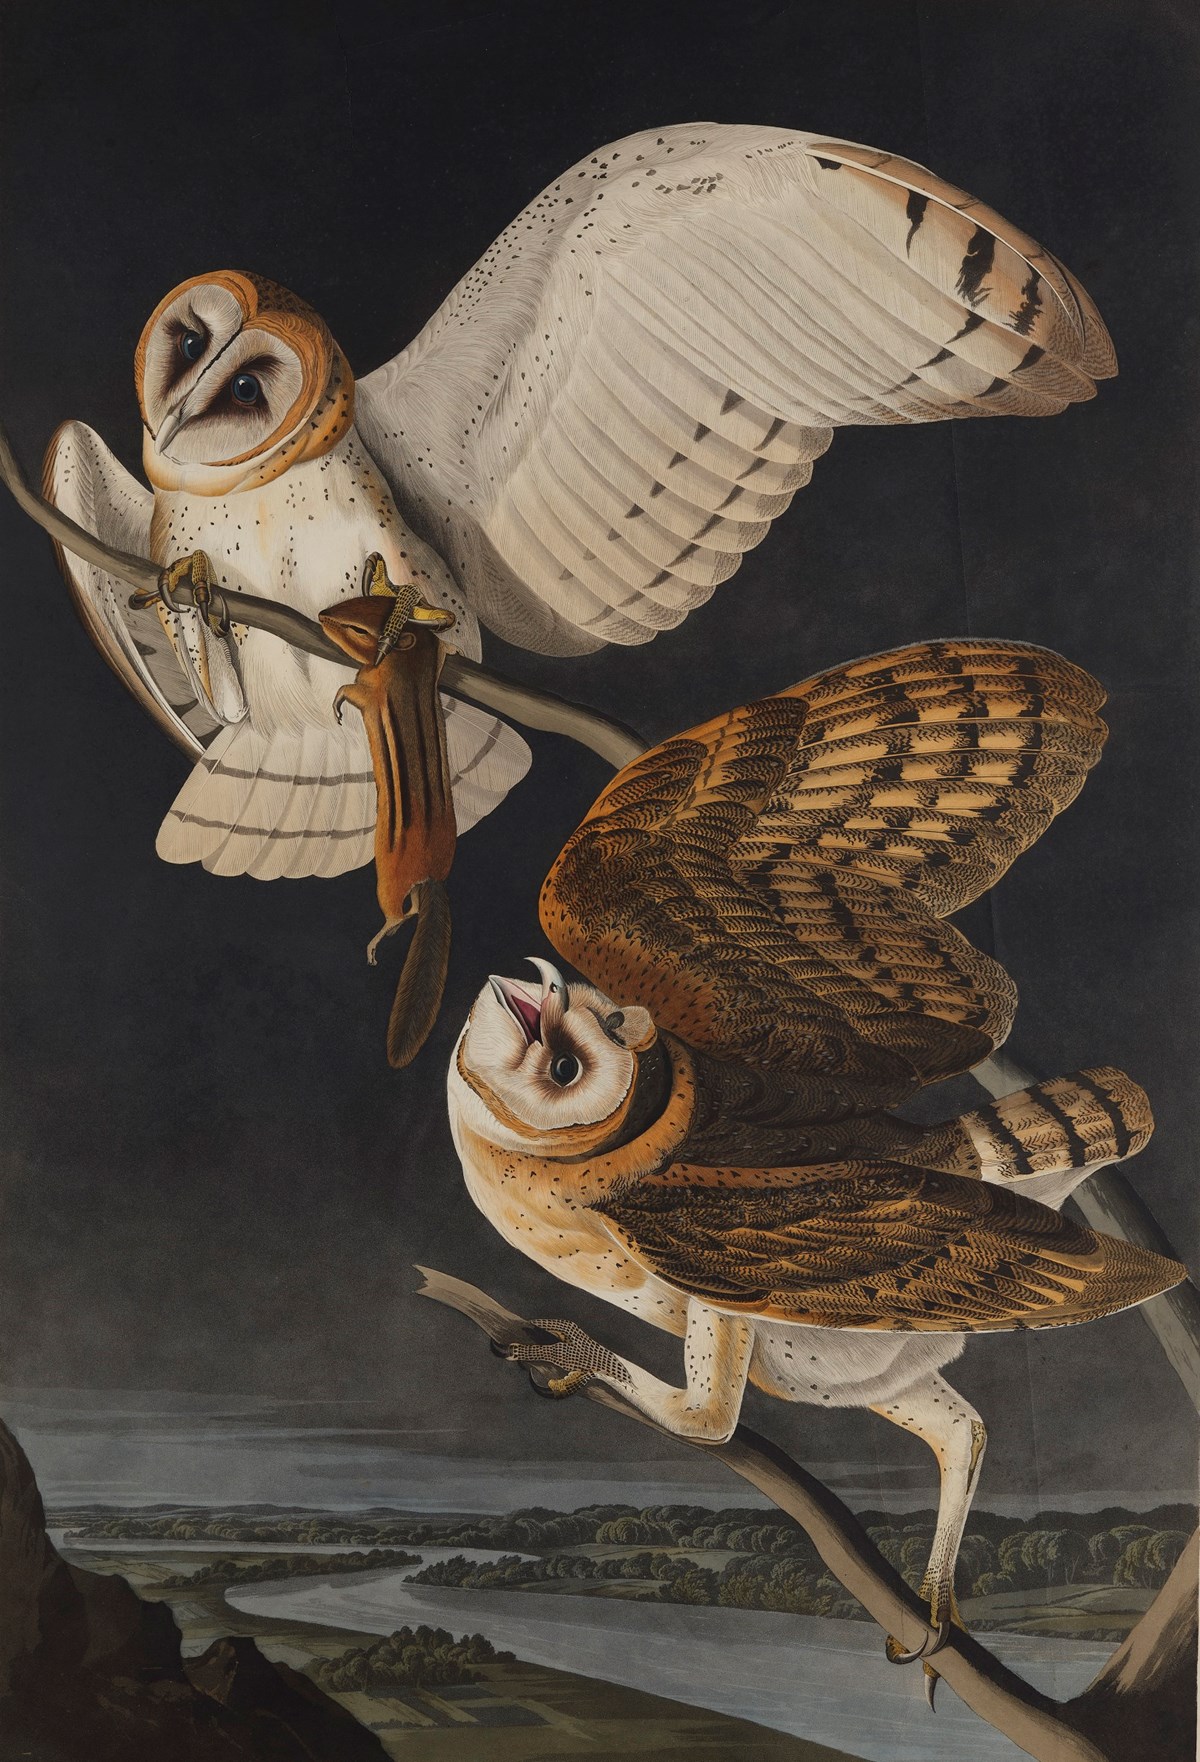 Print depicting Barn Owls from Birds of America, by John James Audubon. Image © National Museums Scotland (2)